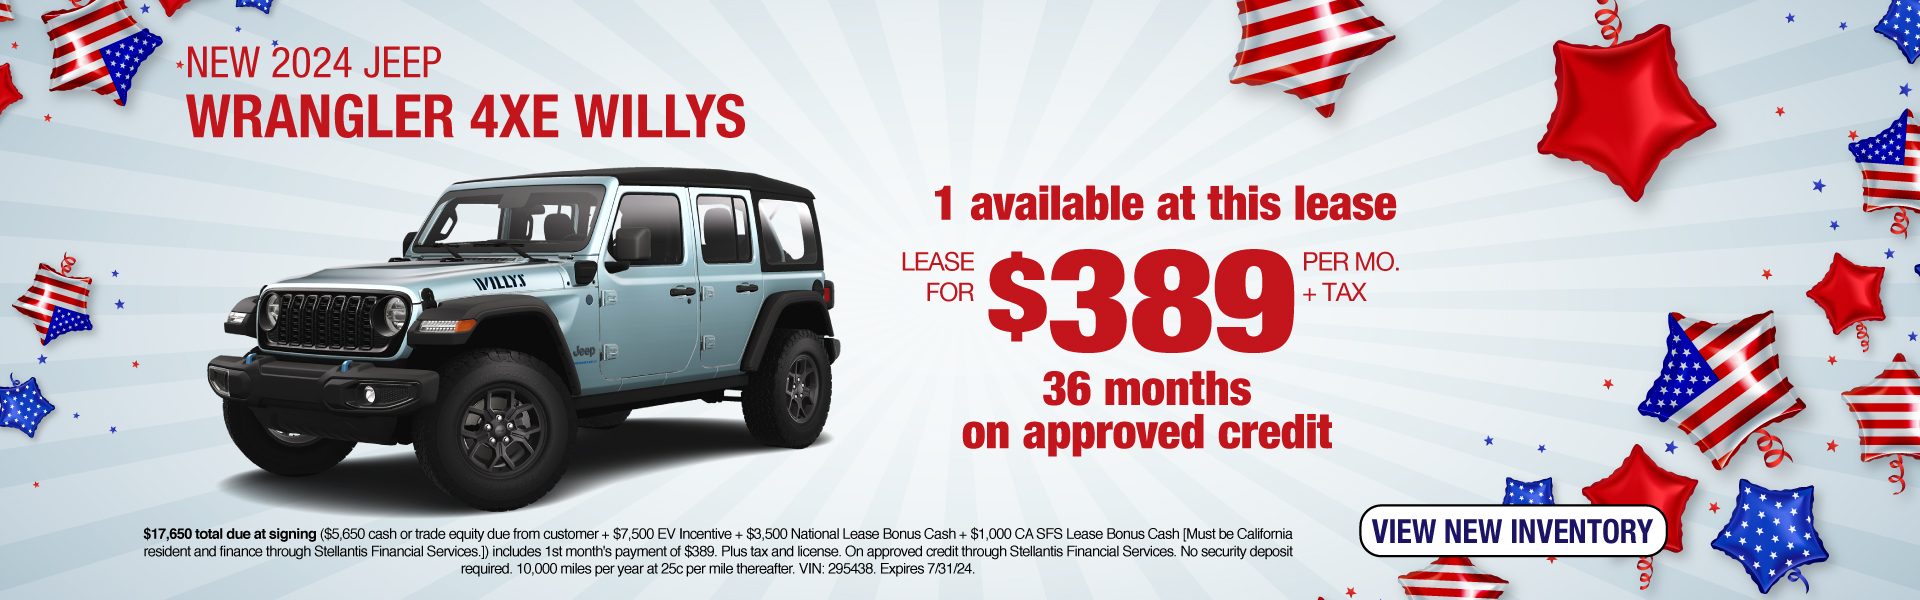 Get a New 2024 Jeep Wrangler 4xe Willys lease for $389 per mo. + tax for 36 months on approved credit! Expires 7/31/24.